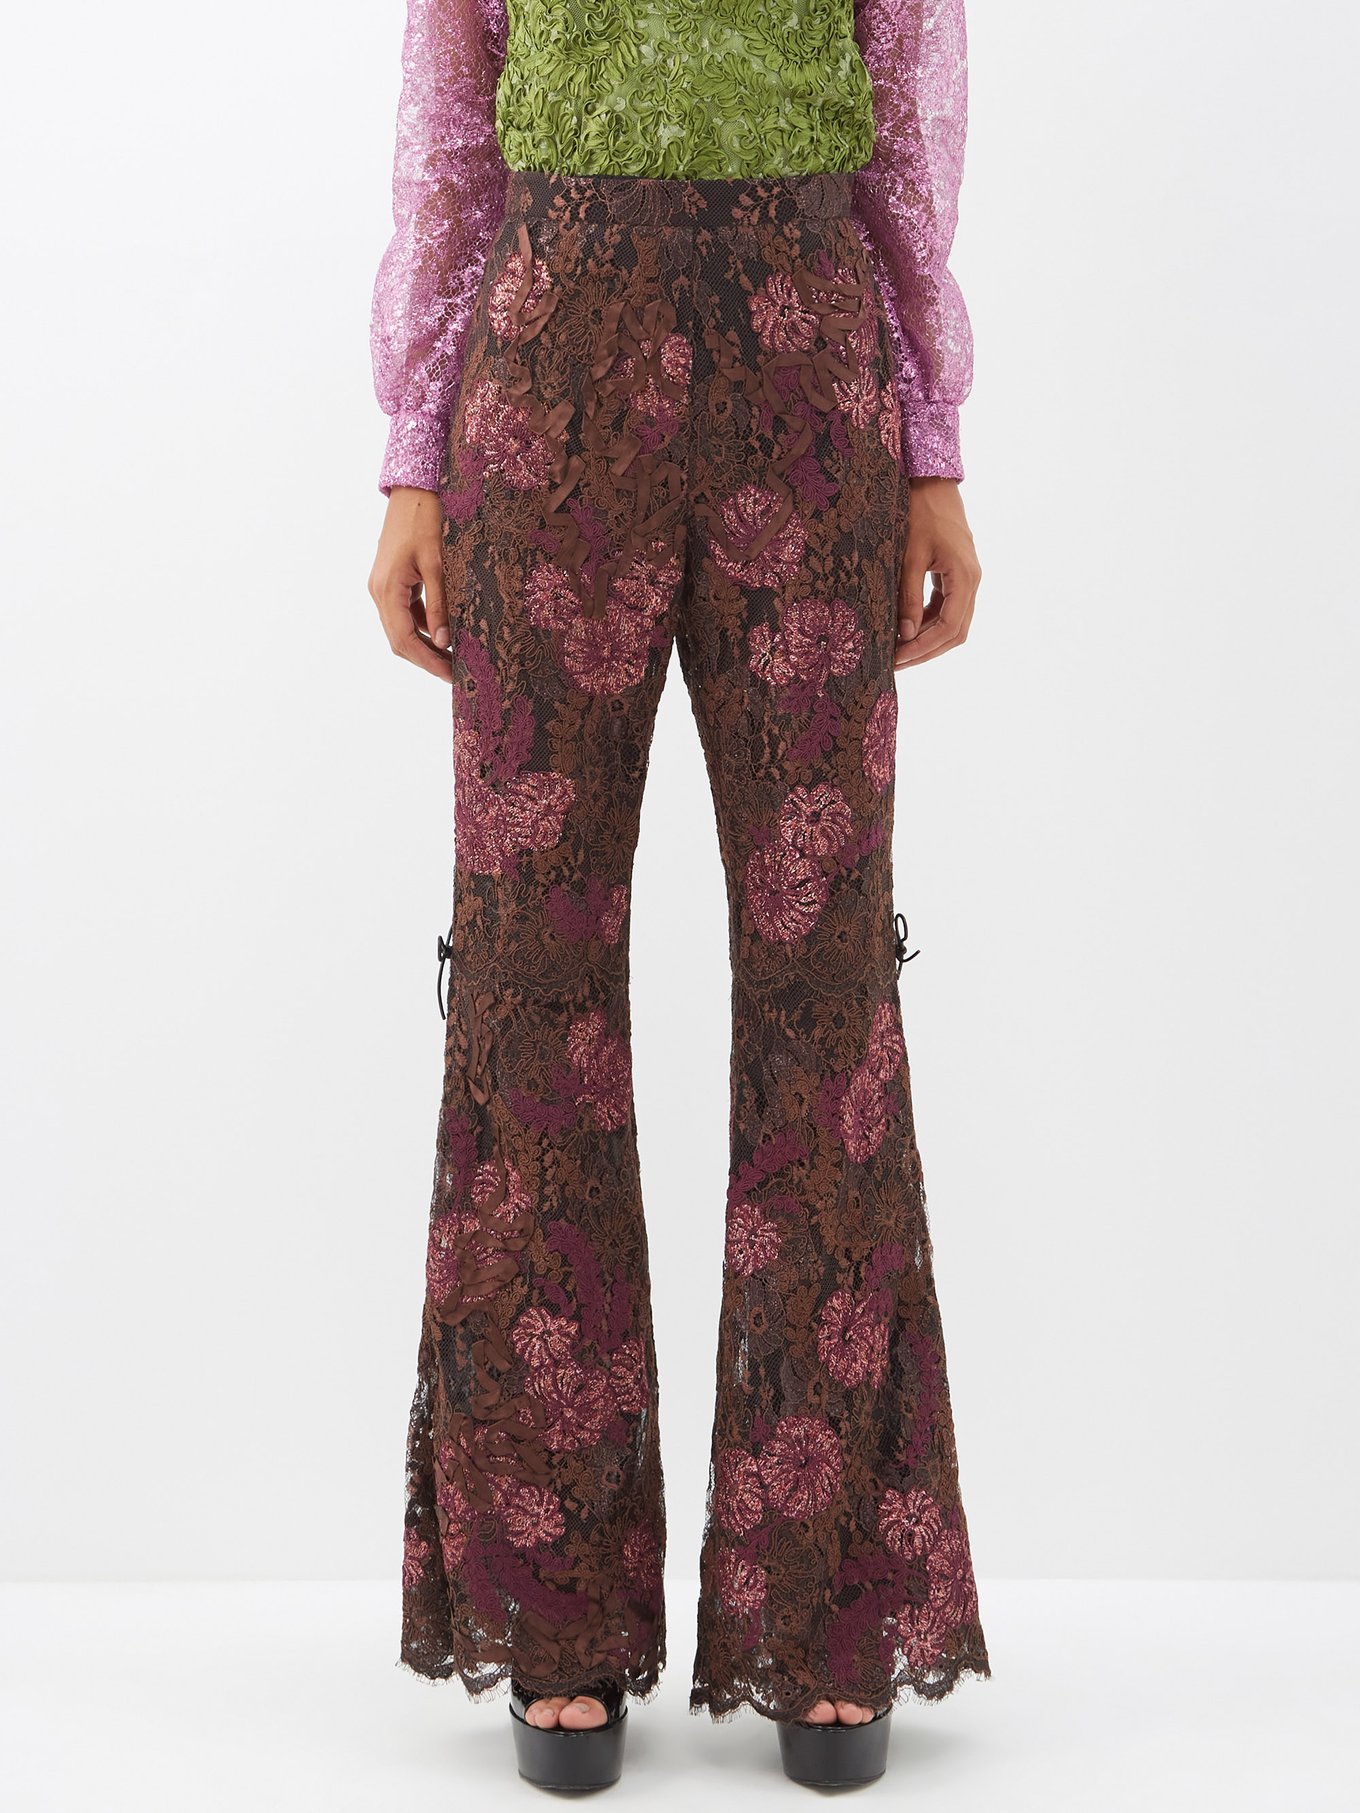 Cotton Blend Floral Lace Flared Trousers